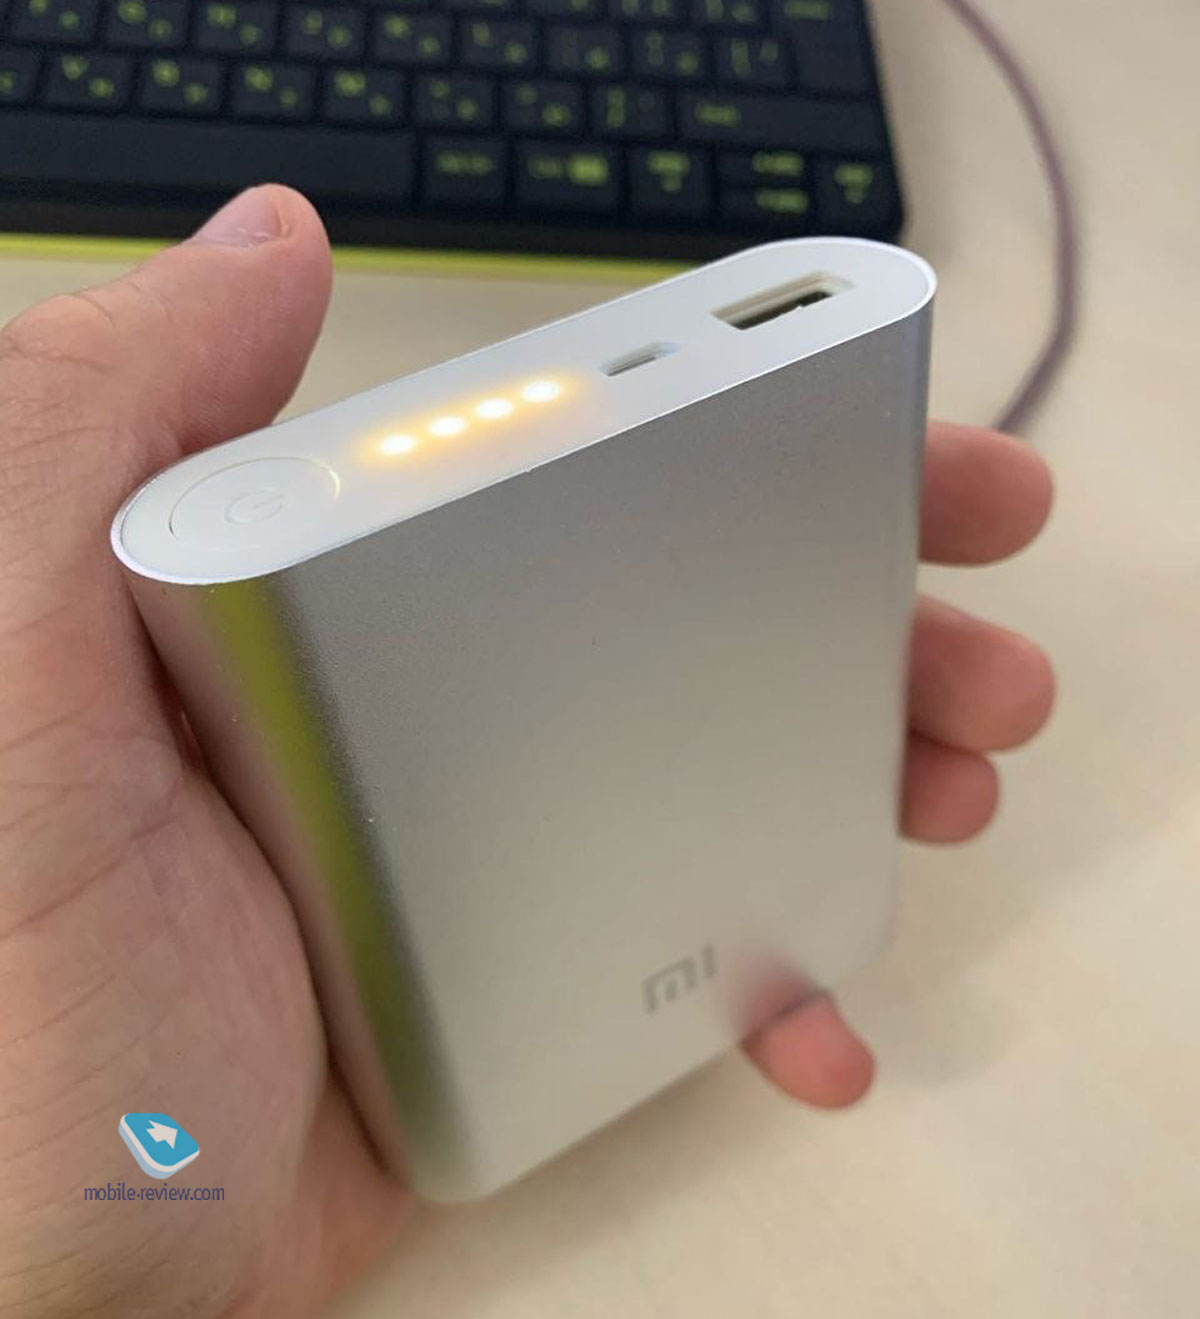 Anatomy of a forgery. Xiaomi power bank with silicon filling